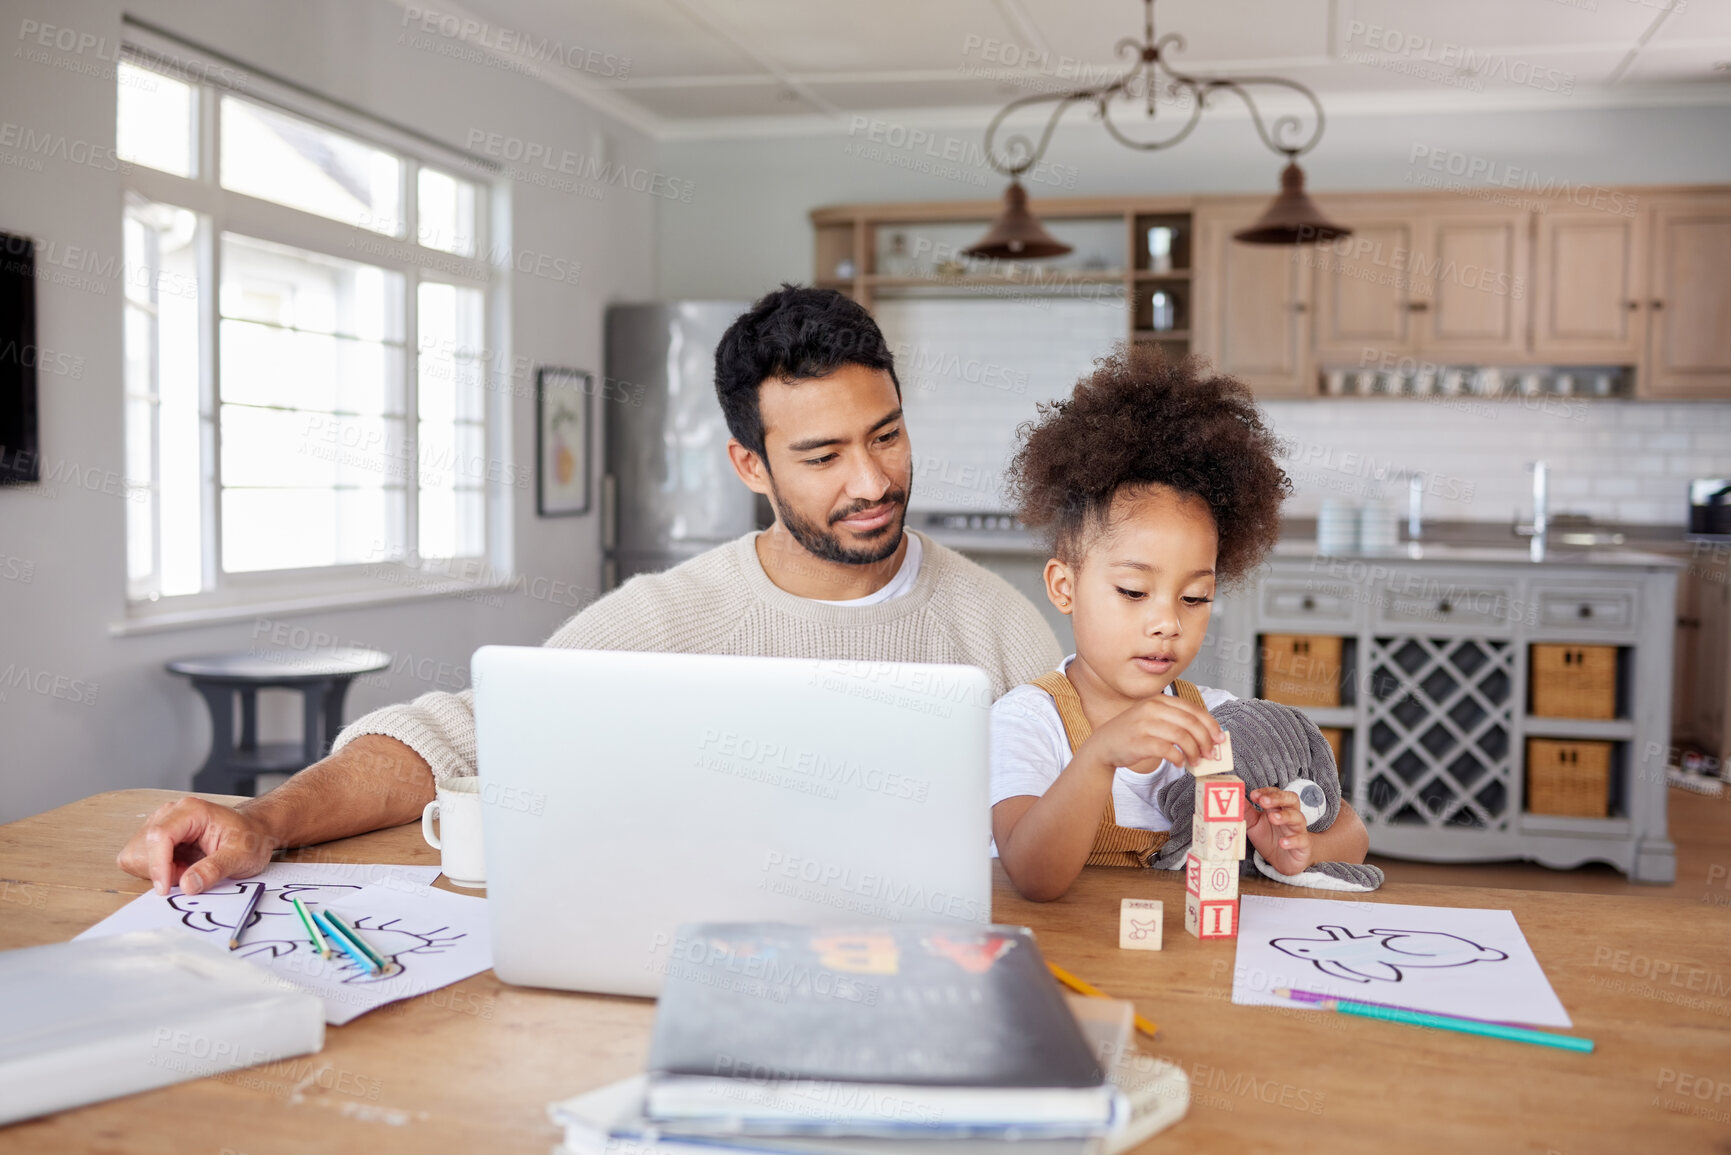 Buy stock photo An adorable mixed race girl with an afro doing her homework in the living room while her young dad works on his laptop. A father and an entrepreneur. Working at home means he's there for his daughter